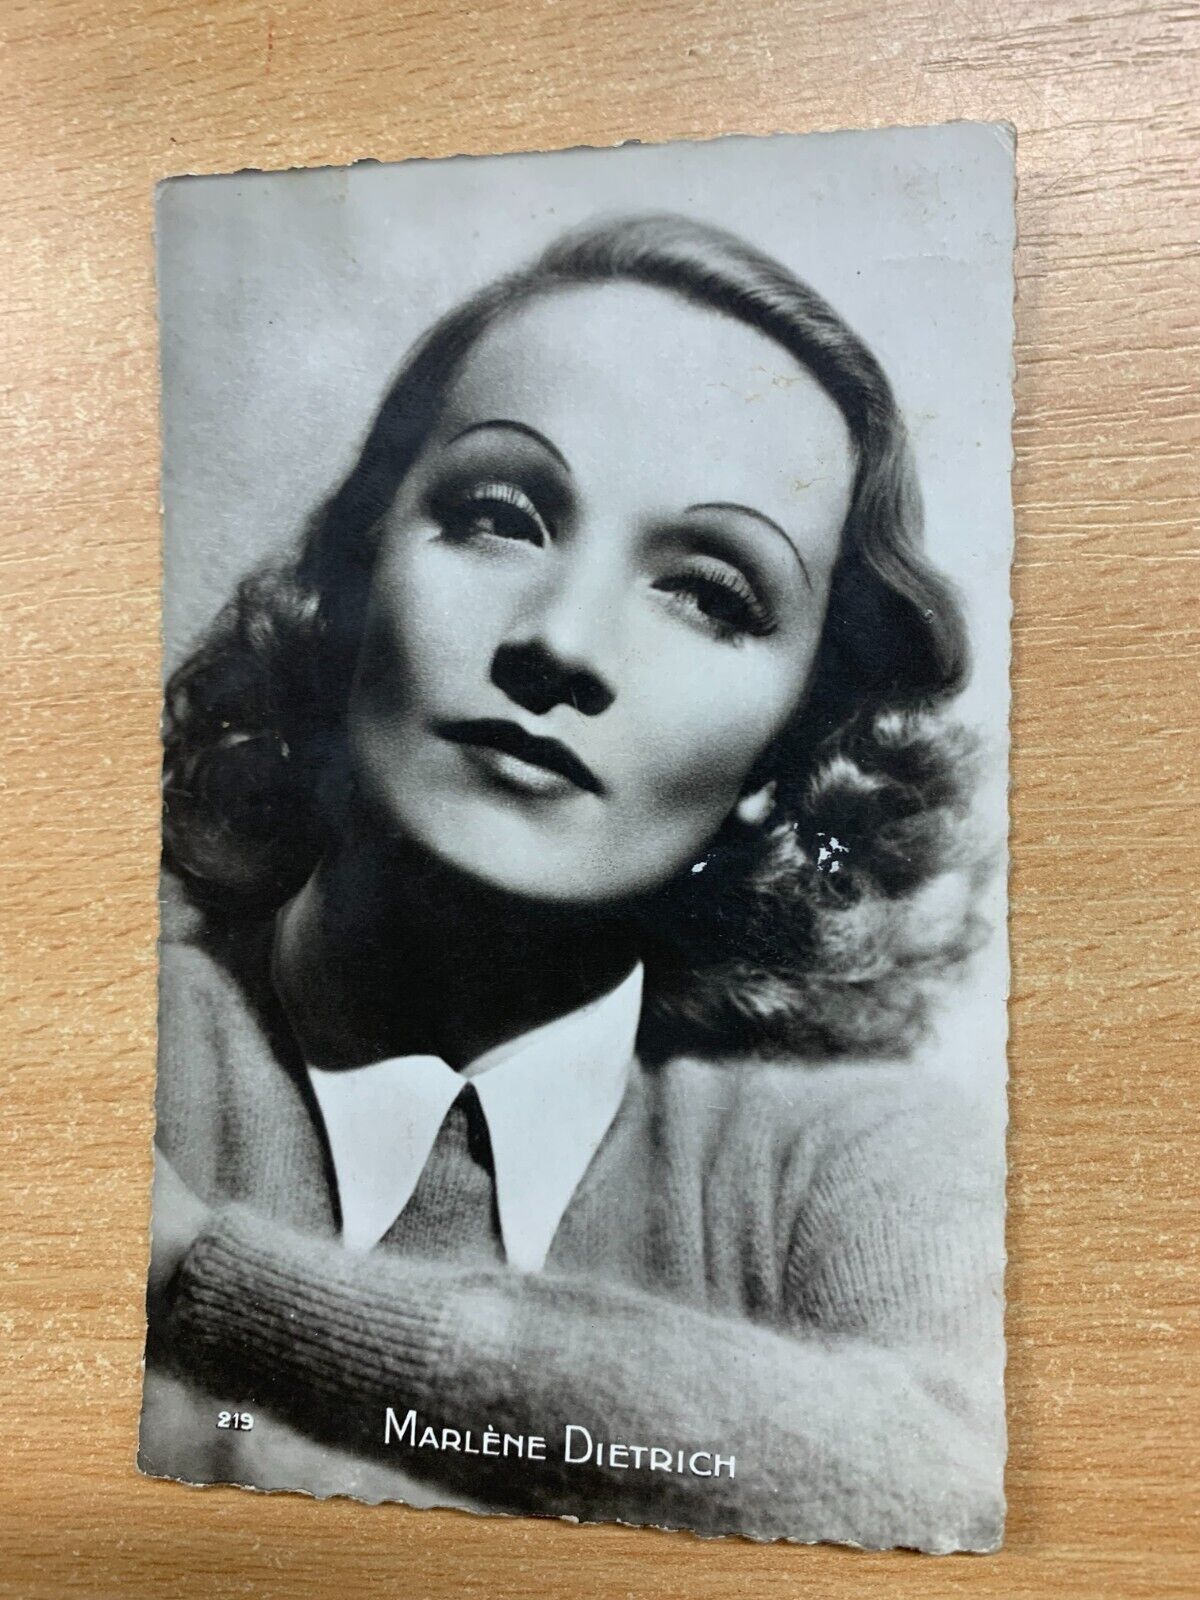 VINTAGE MARLENE DIETRICH ACTRESS FRENCH PHOTO POSTCARD (LL)